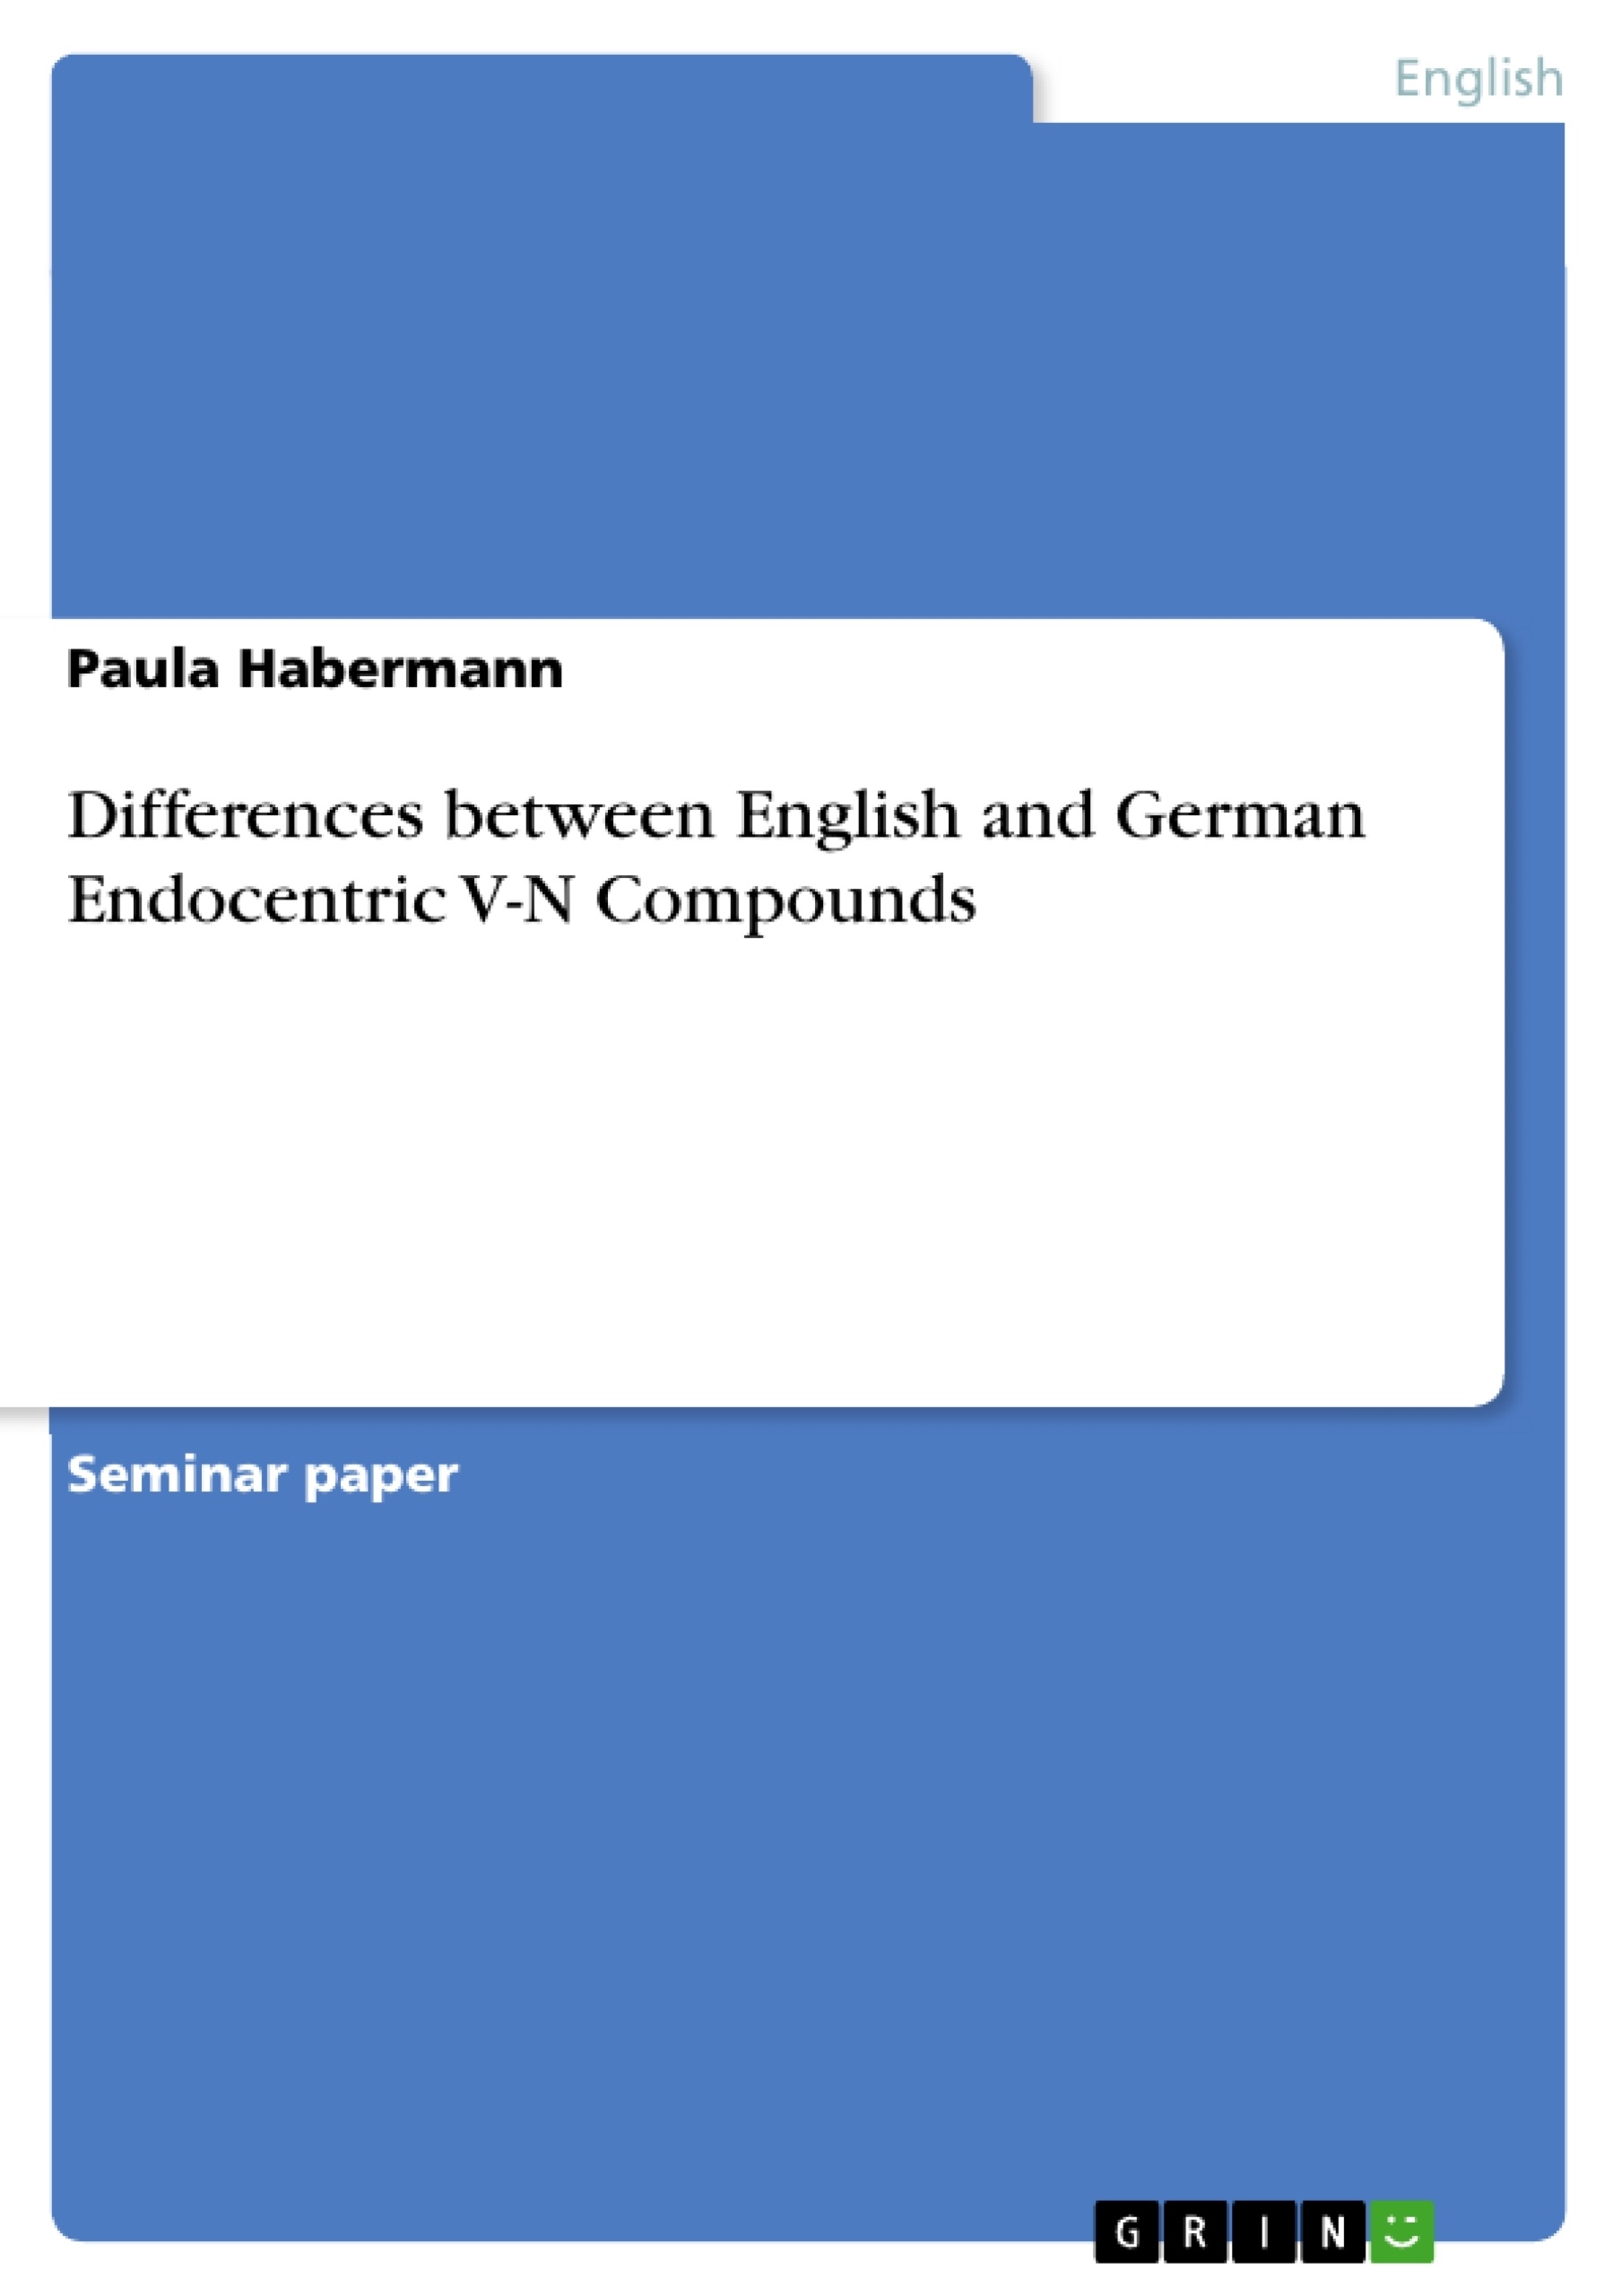 Titre: Differences between English and German Endocentric V-N Compounds